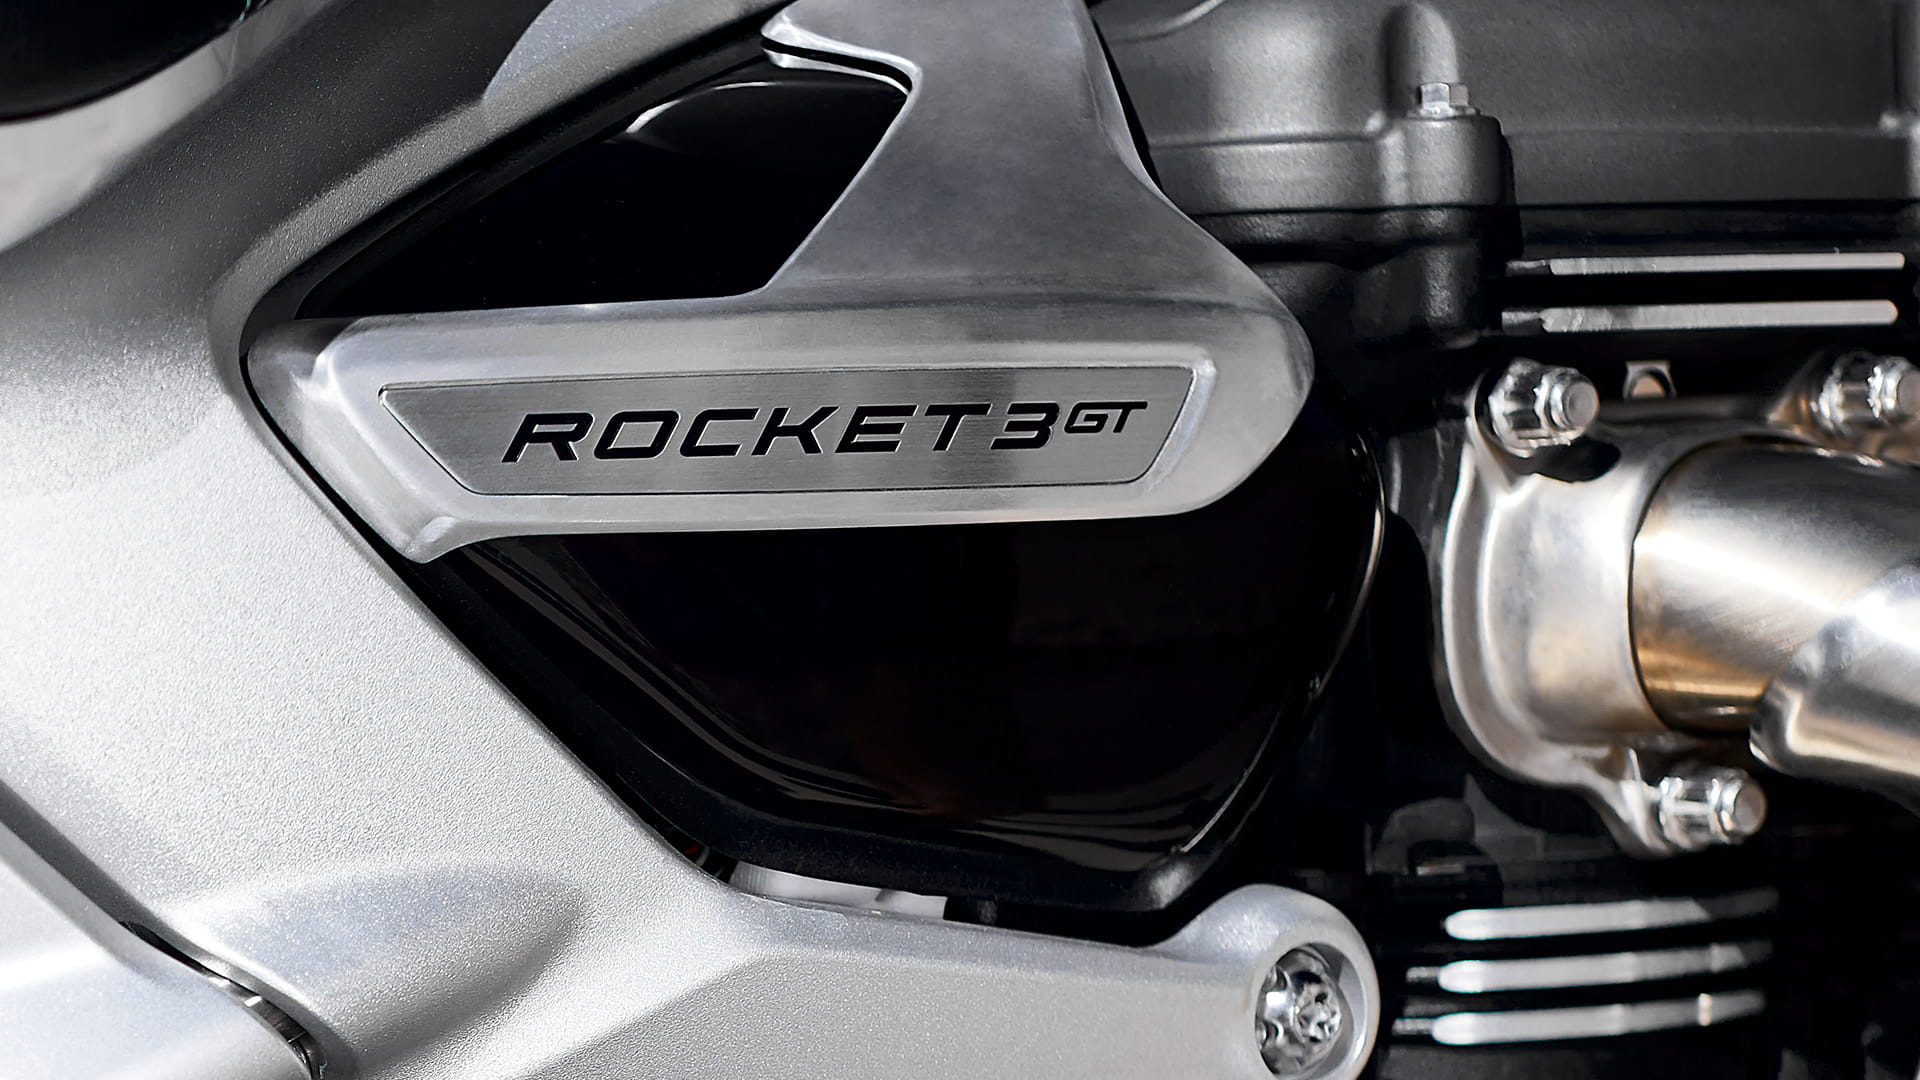 Close-up shot of the class-defining finish of the torque assist hydraulic clutch on the Triumph Rocket 3 GT